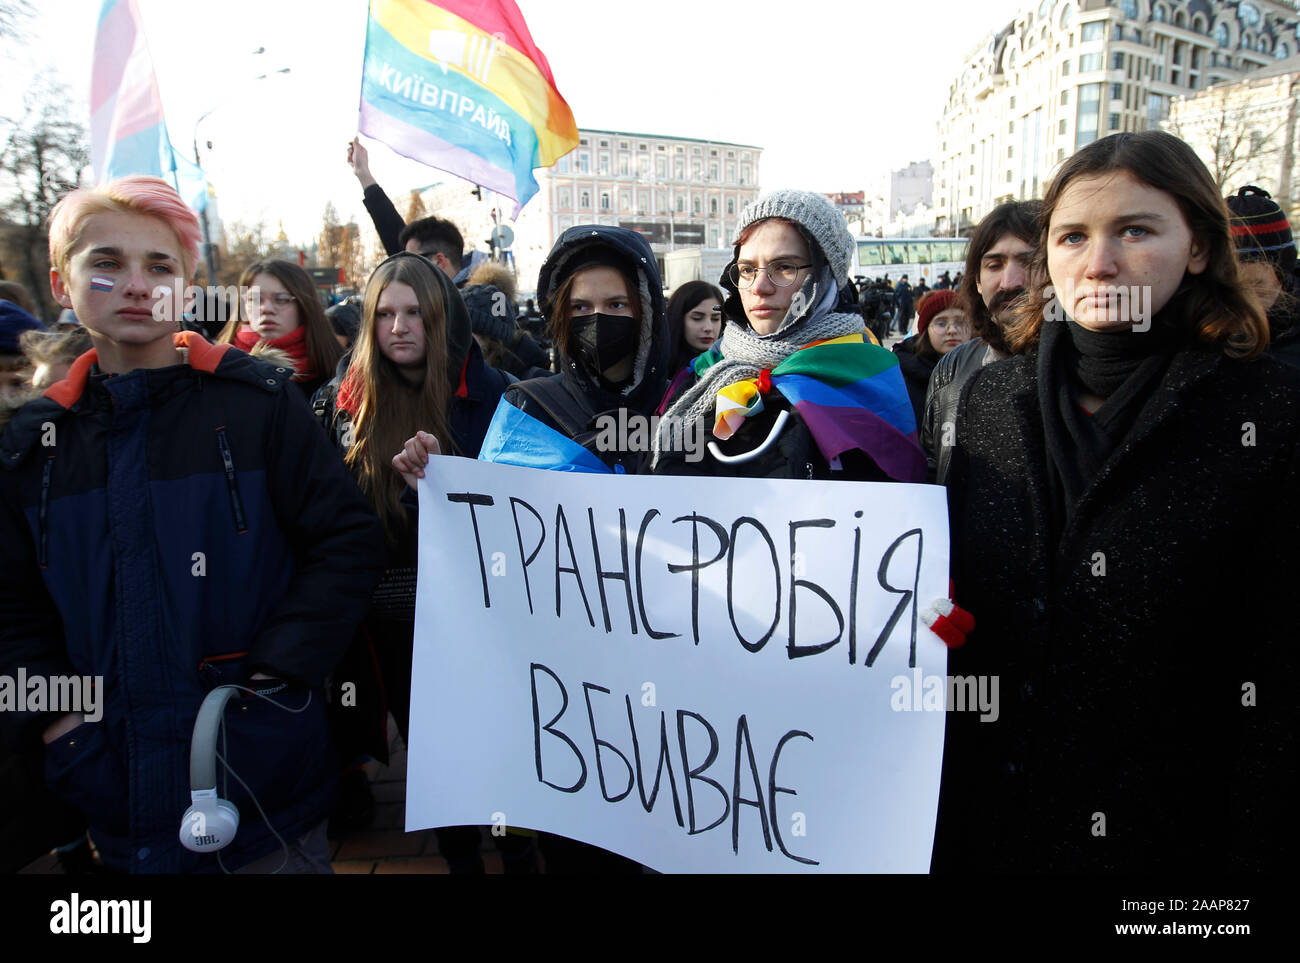 Participants hold a placard saying 'Transphobia kills' during the protest.Transgender rights activists in Ukraine’s capital Kyiv held a march to mark Transgender Day of Remembrance. In 2018, the police failed to protect those participating in a similar march from attacks by violent groups advocating hatred and discrimination. This year, there is a serious risk of new attacks and the police must ensure people can safely exercise their rights to freedom of peaceful assembly and expression without discrimination. Stock Photo